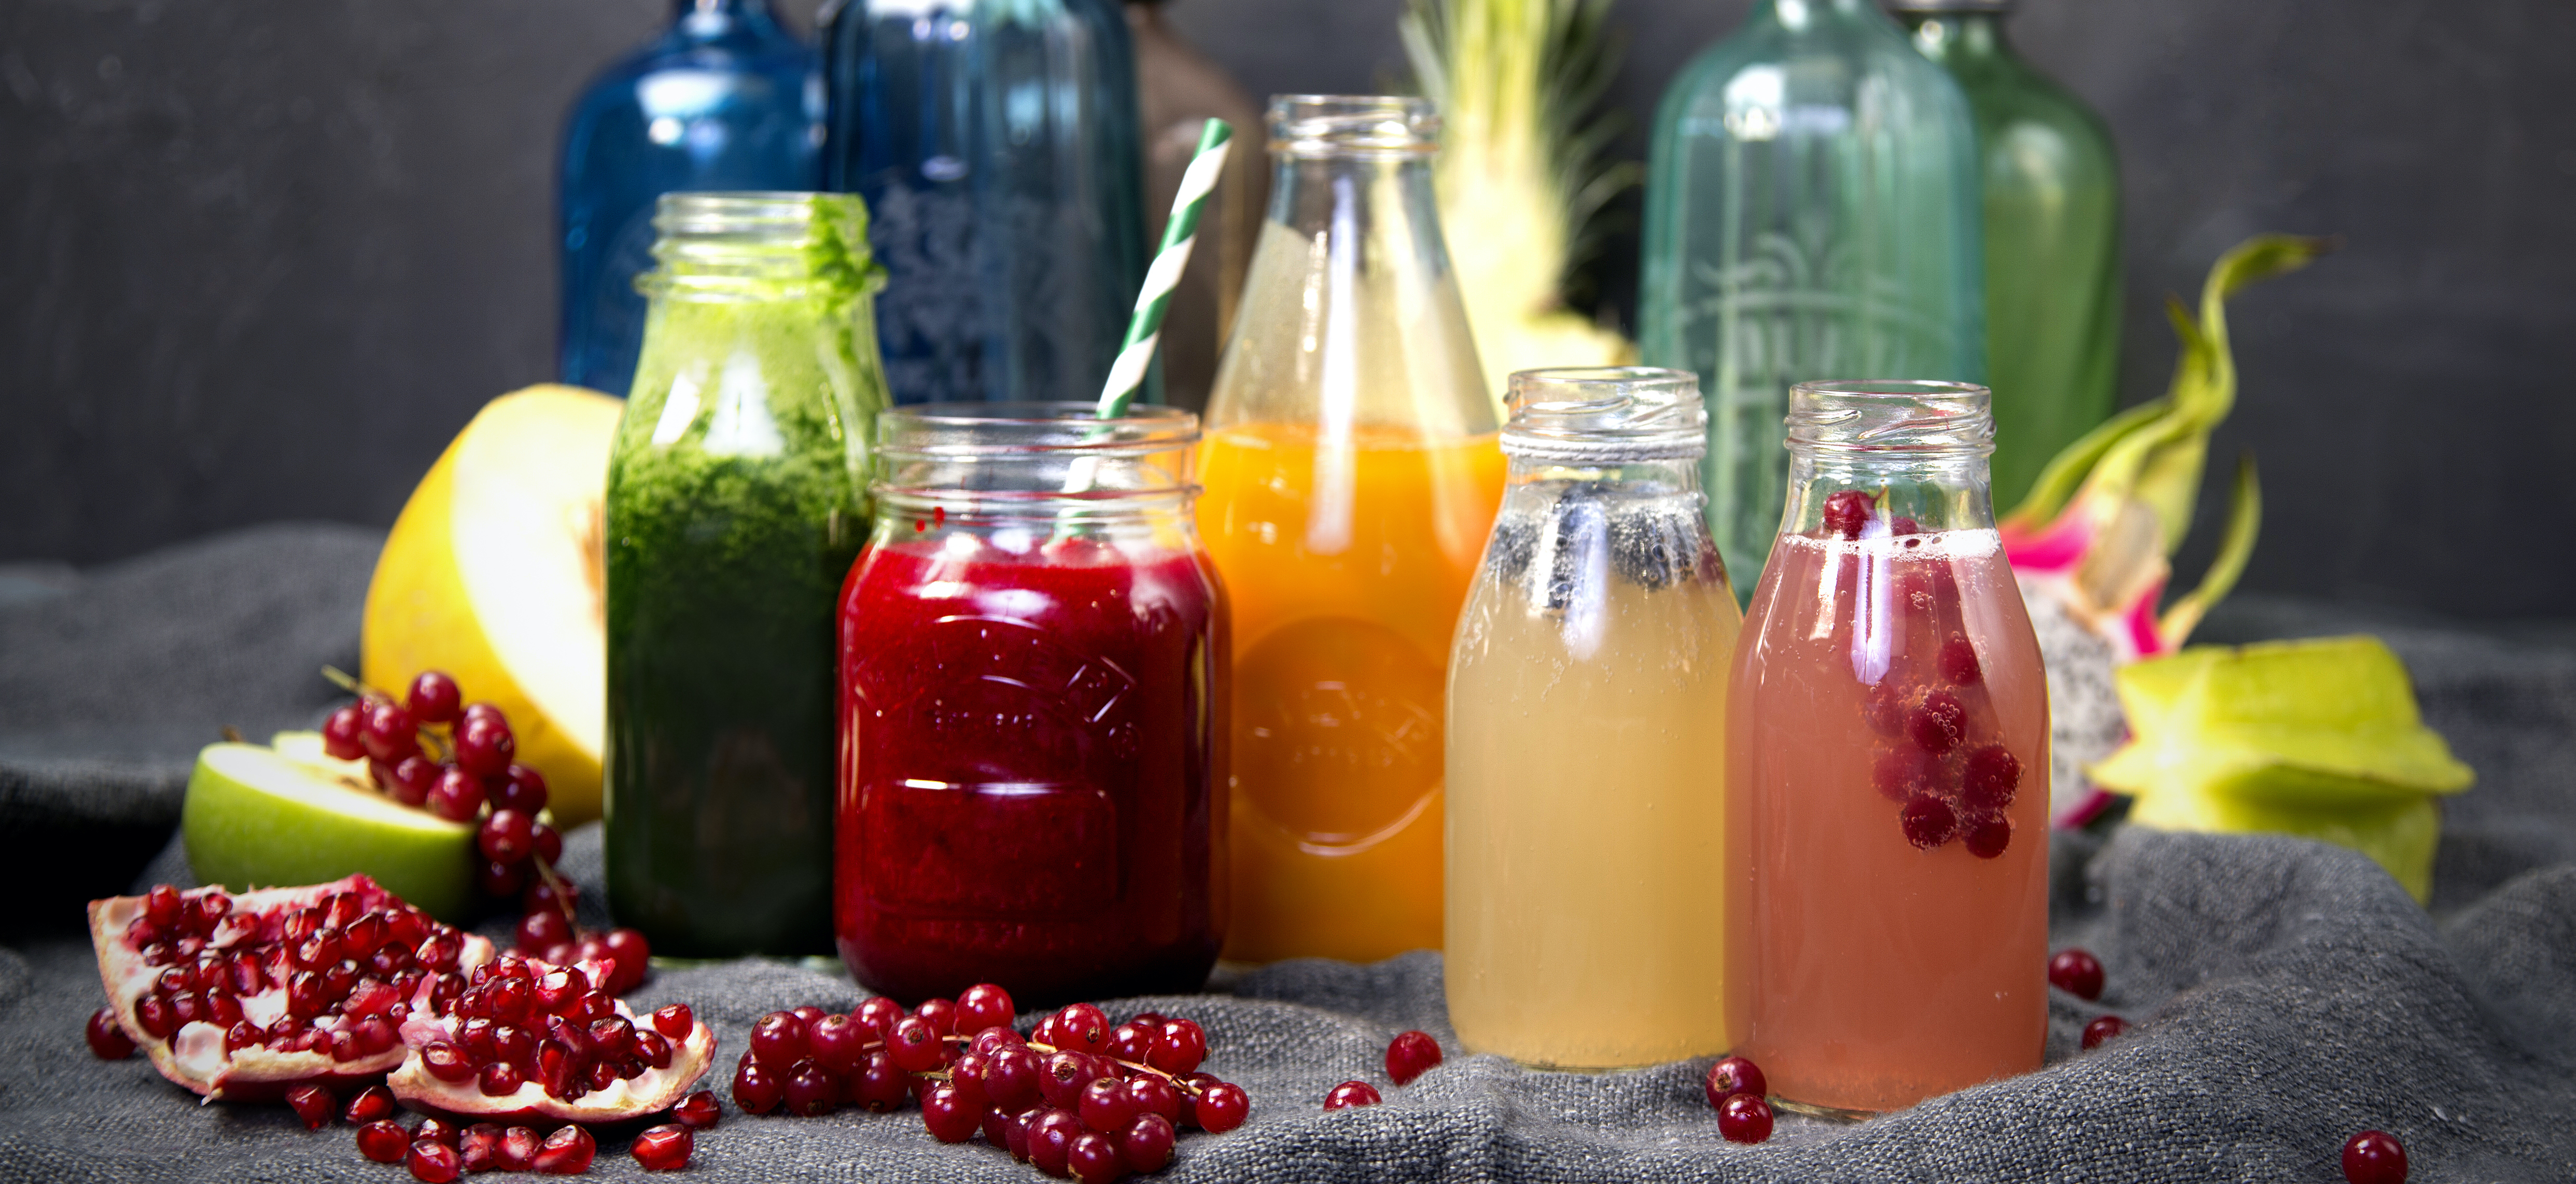 picture of smoothies and juices